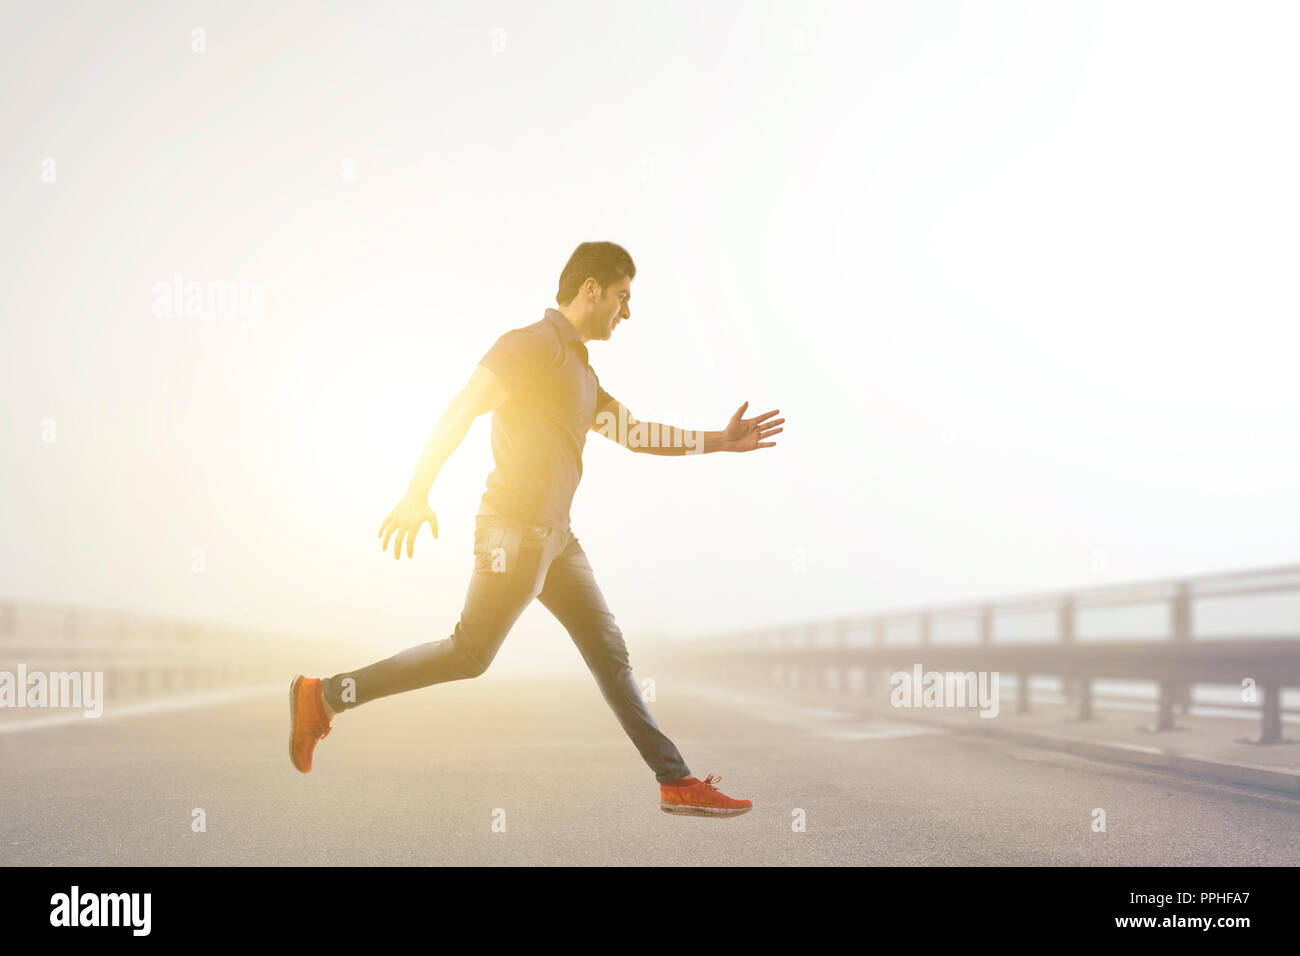 Young man leaping joyfully in mid air across the road with sun in the background. Stock Photo